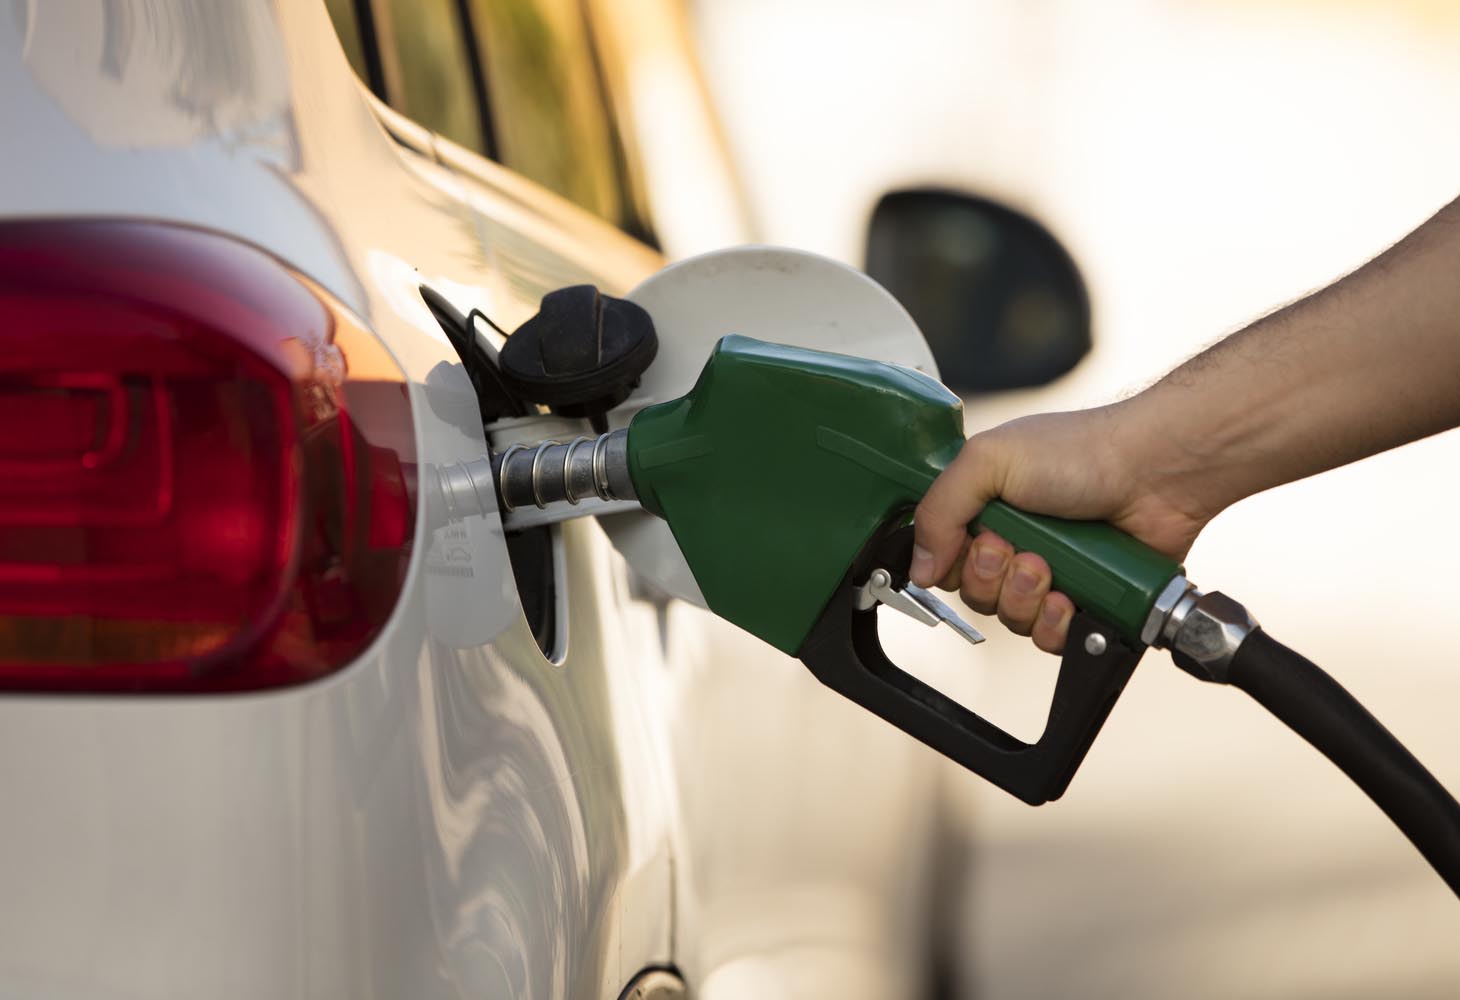 Innovation in fuel marking technology advances fuel fraud prevention